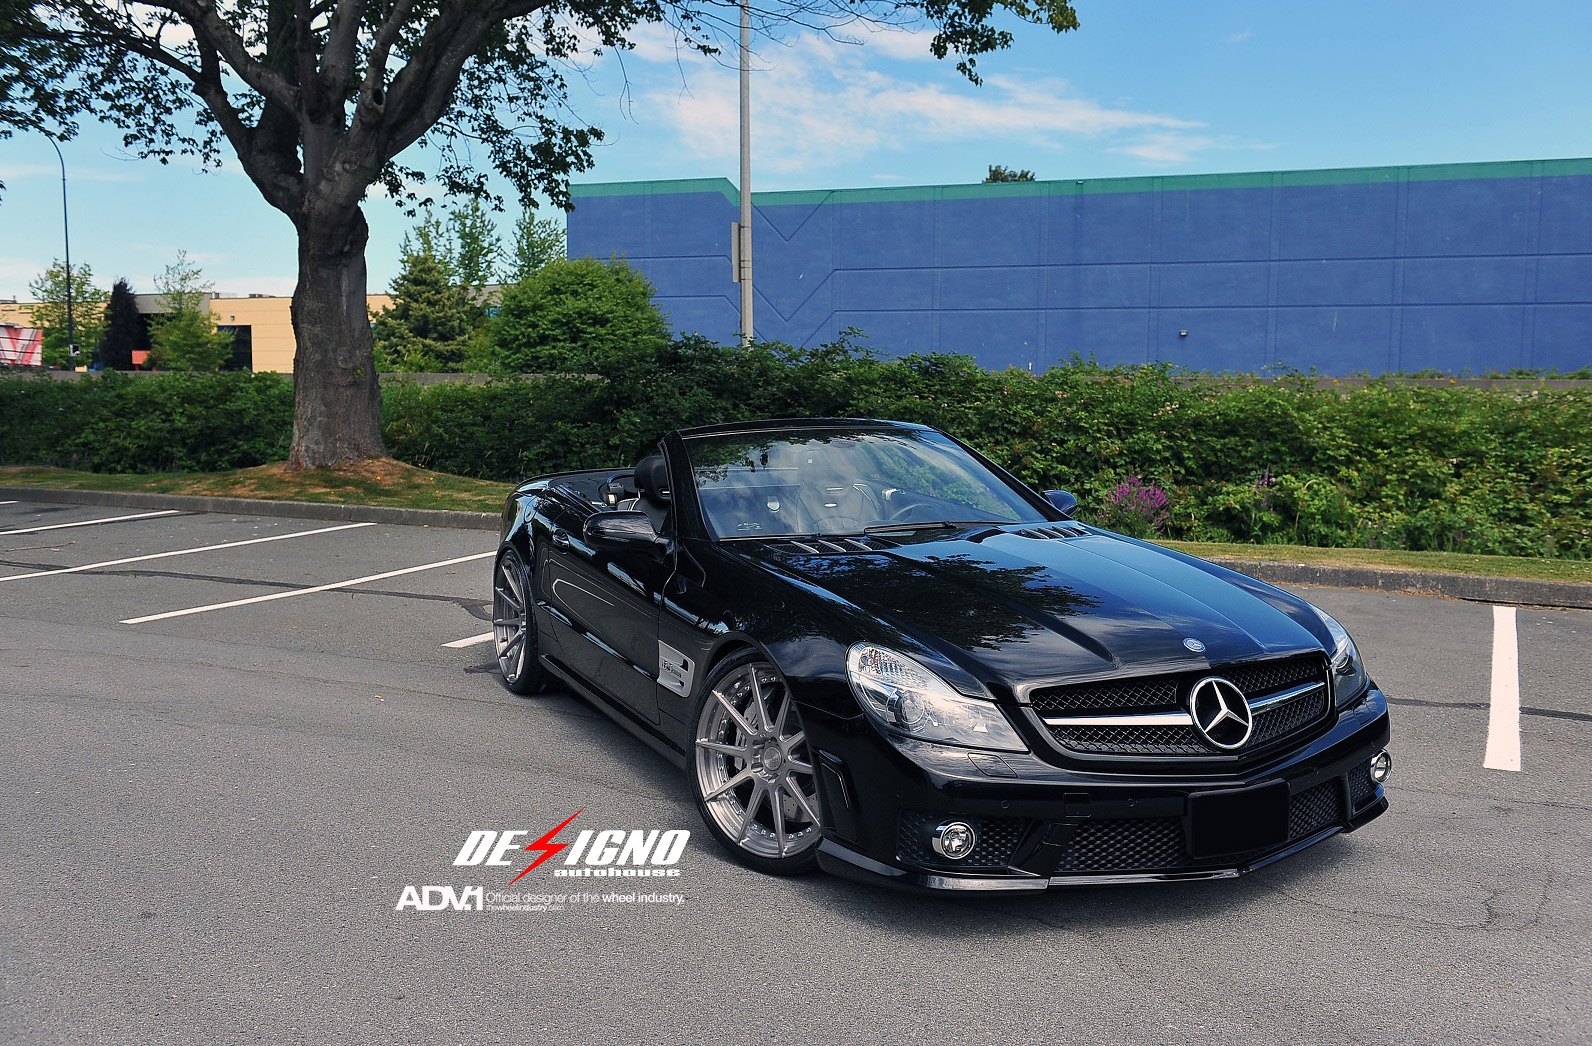 Black Convertible Mercedes SL Class with Custom Front Lip - Photo by ADV.1